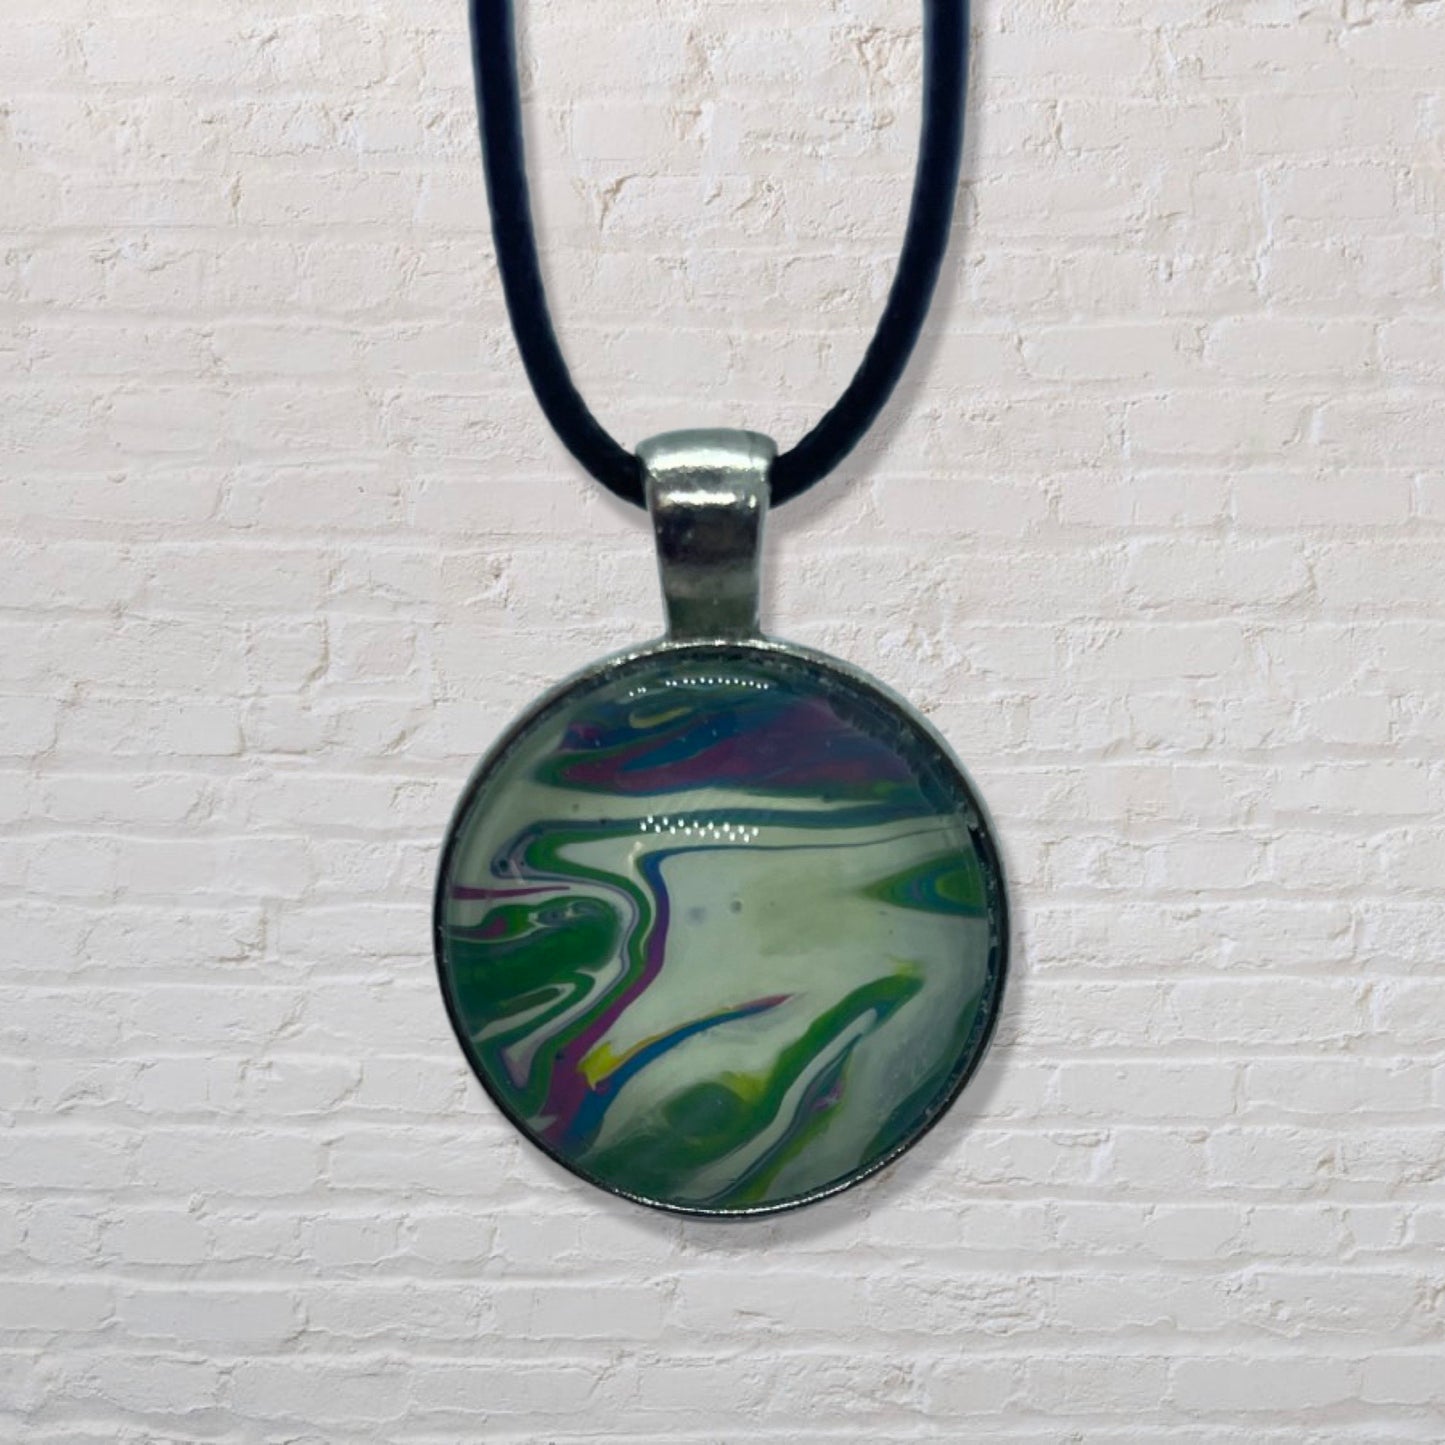 By The Kids -- Paint Pour Necklace - White, Green and Pink